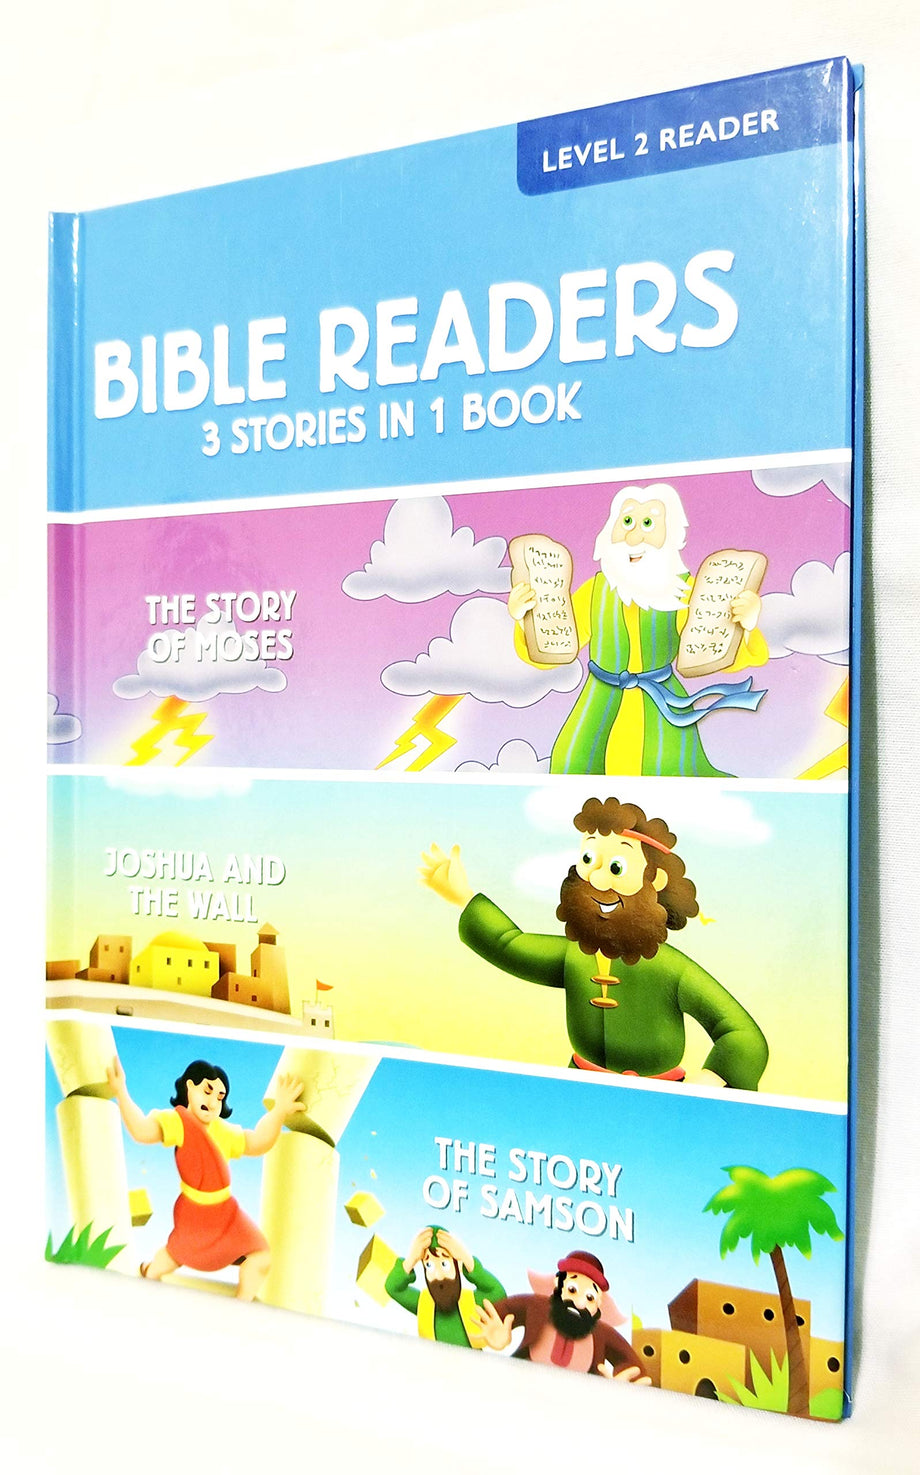 Book!　Books　Libris　Reader　Facto　Stories　by　in　Clever　Ex　Level　Used　Bible　–　Readers:　The